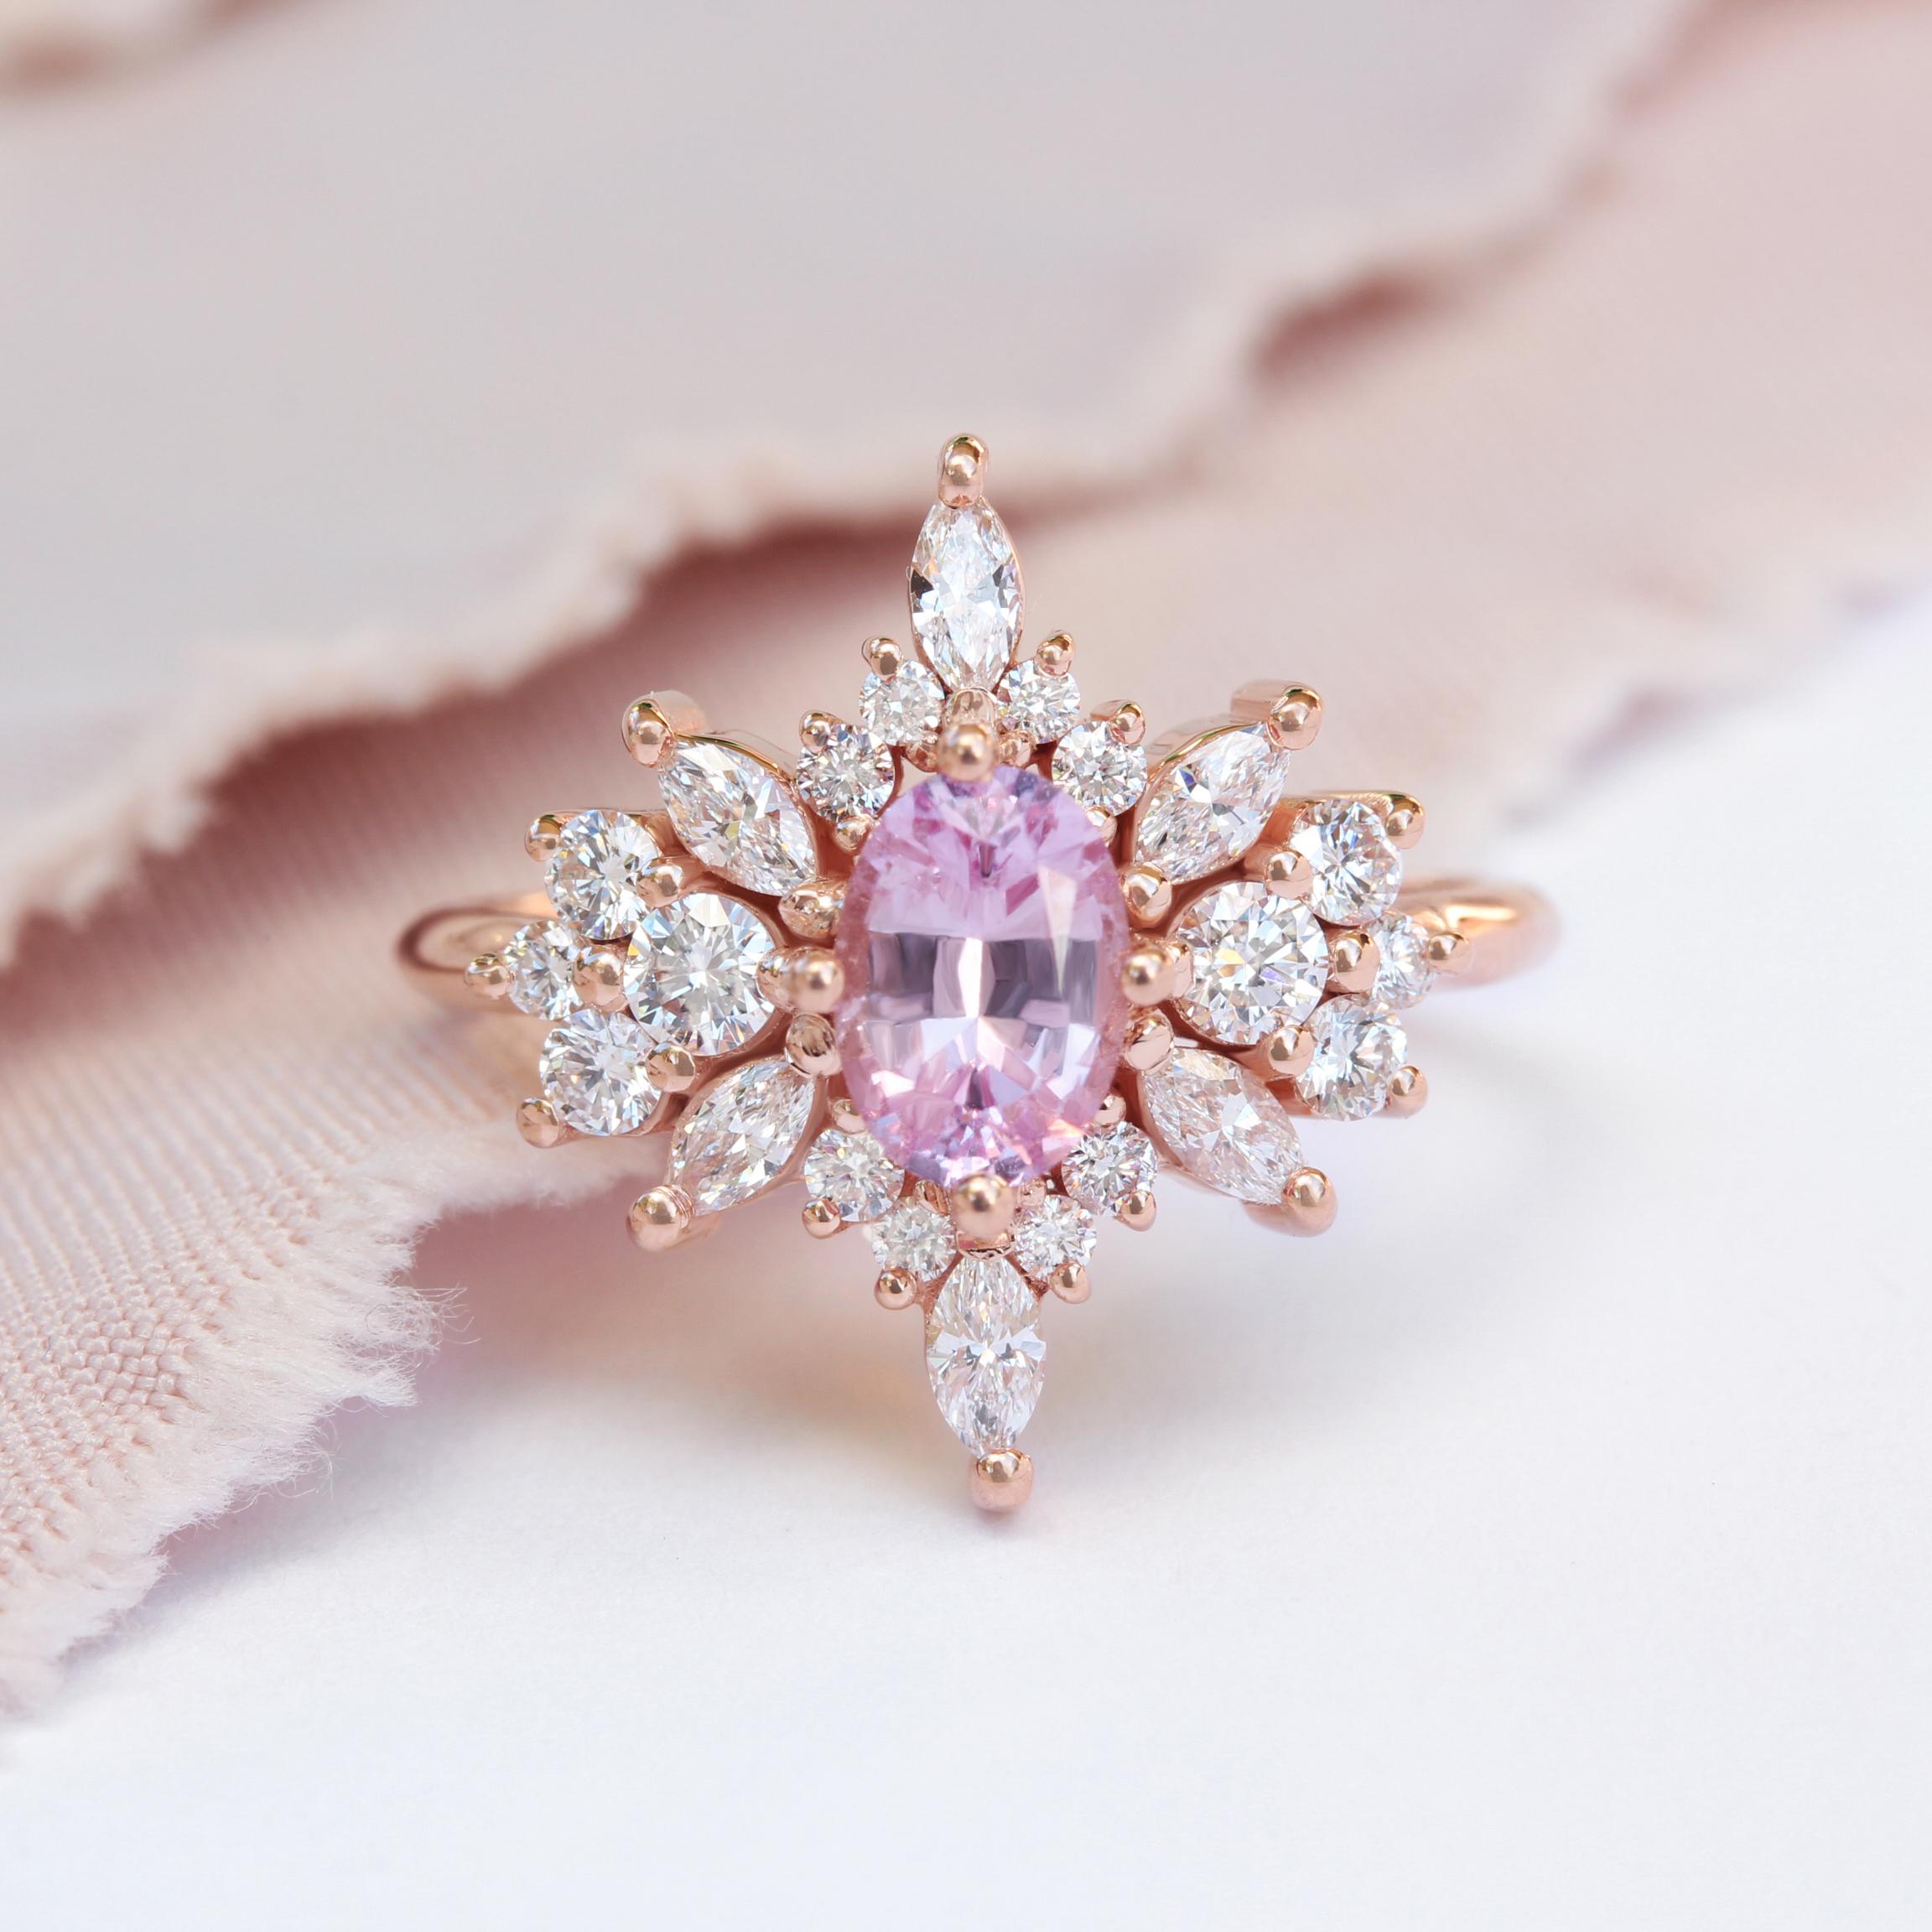 Unique and stunning Oval Pink Sapphire & Diamonds cluster engagement ring - Phoenix.
Sapphire is September's birthstone. It has been believed to bring inner peace, protect against harm, and enhance spiritual growth. 

Each ring is handmade and